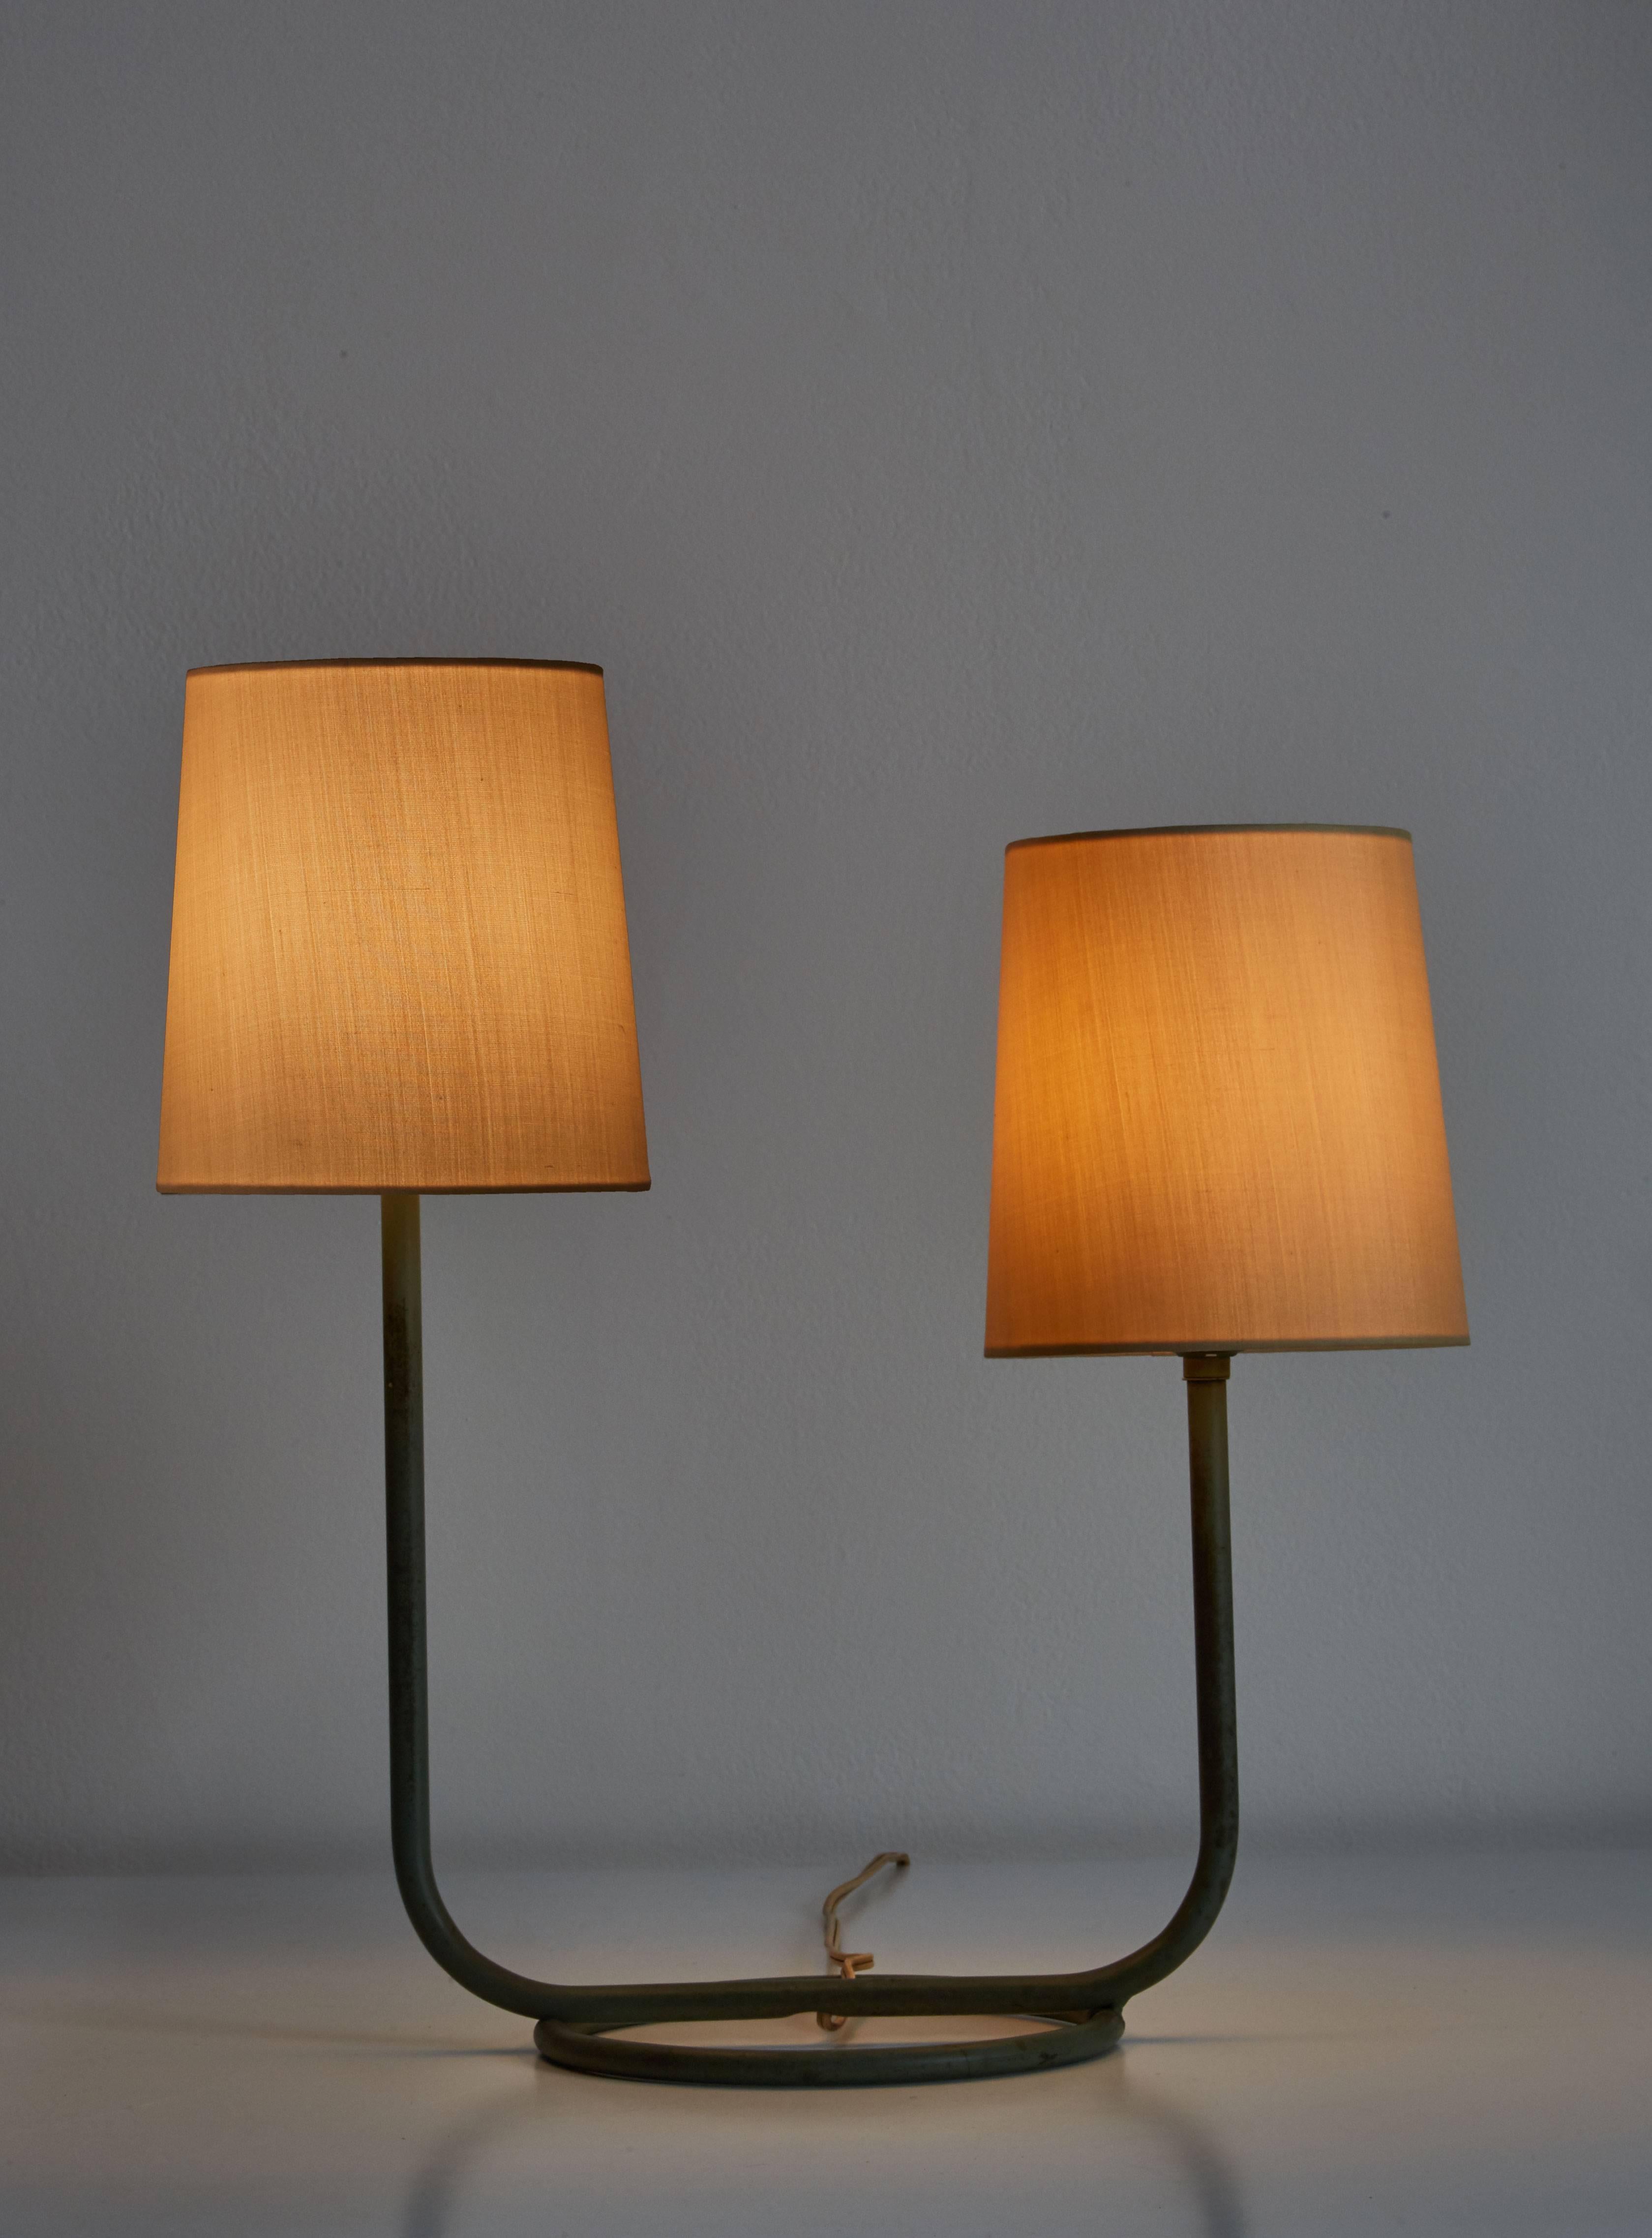 Double arm table lamp by Kurt Versen designed in the US, circa 1950s. Custom silk shades. Original cord and paint. Takes two E26 60w maximum bulbs. Height displayed includes shade.